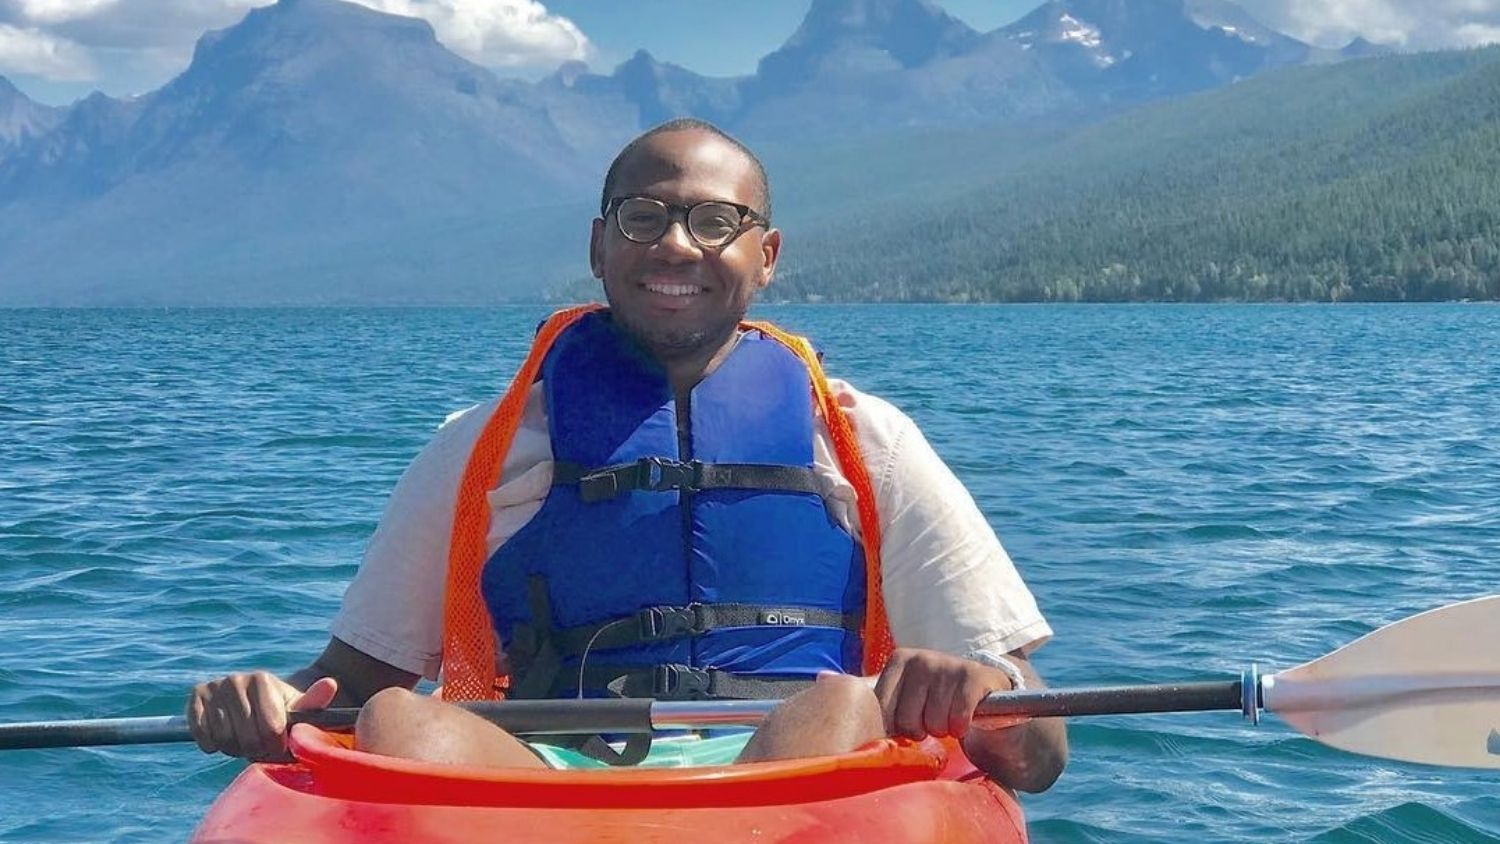 Alumni Profile: Diquan Edmonds is Working to Improve Diversity, Equity and Inclusion in Parks and Recreation, College of Natural Resources, Diquan Edmonds, feature